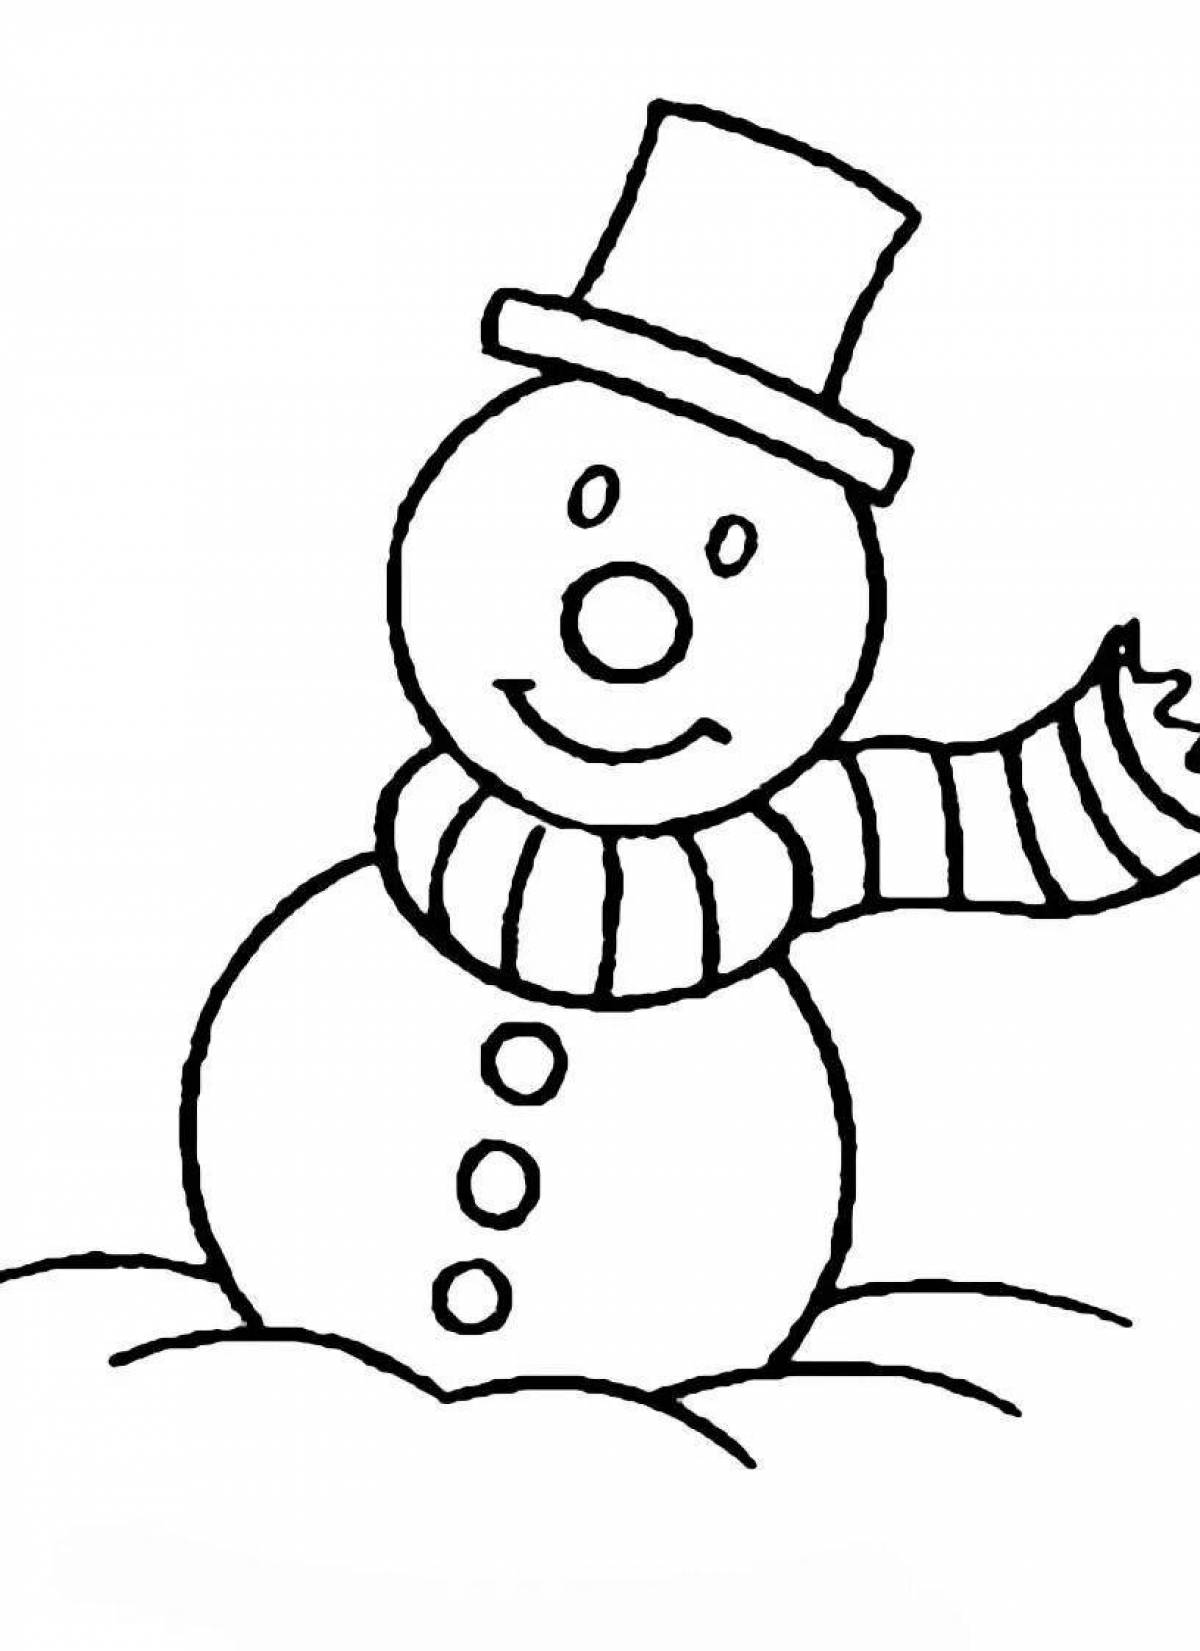 Tempting coloring snowman without a nose